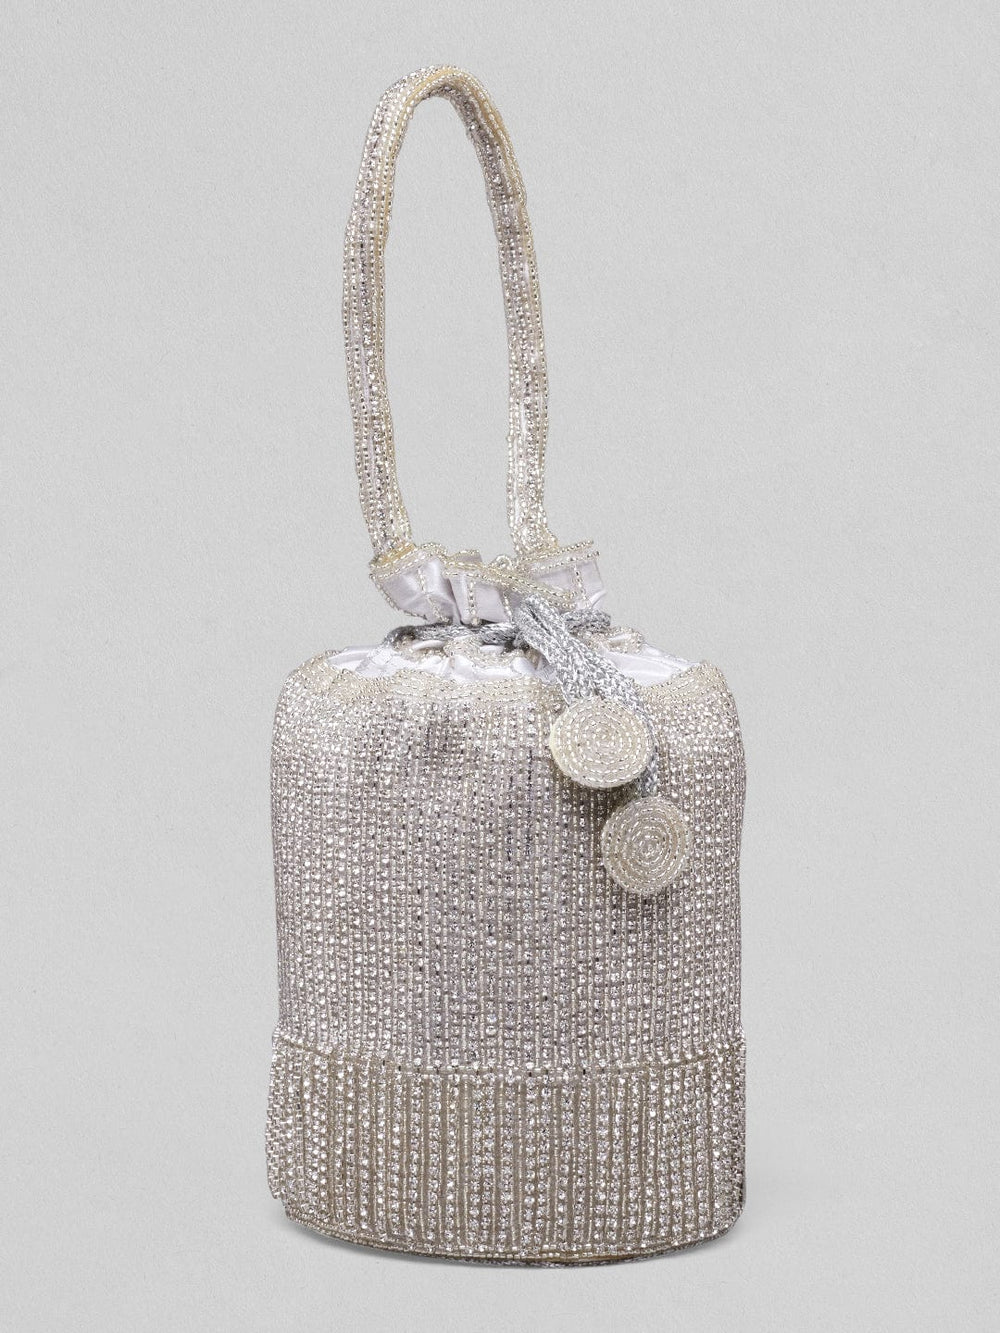 Rubans Off White Coloured Potli Bag With Embroided Design And Pearls. Handbag & Wallet Accessories